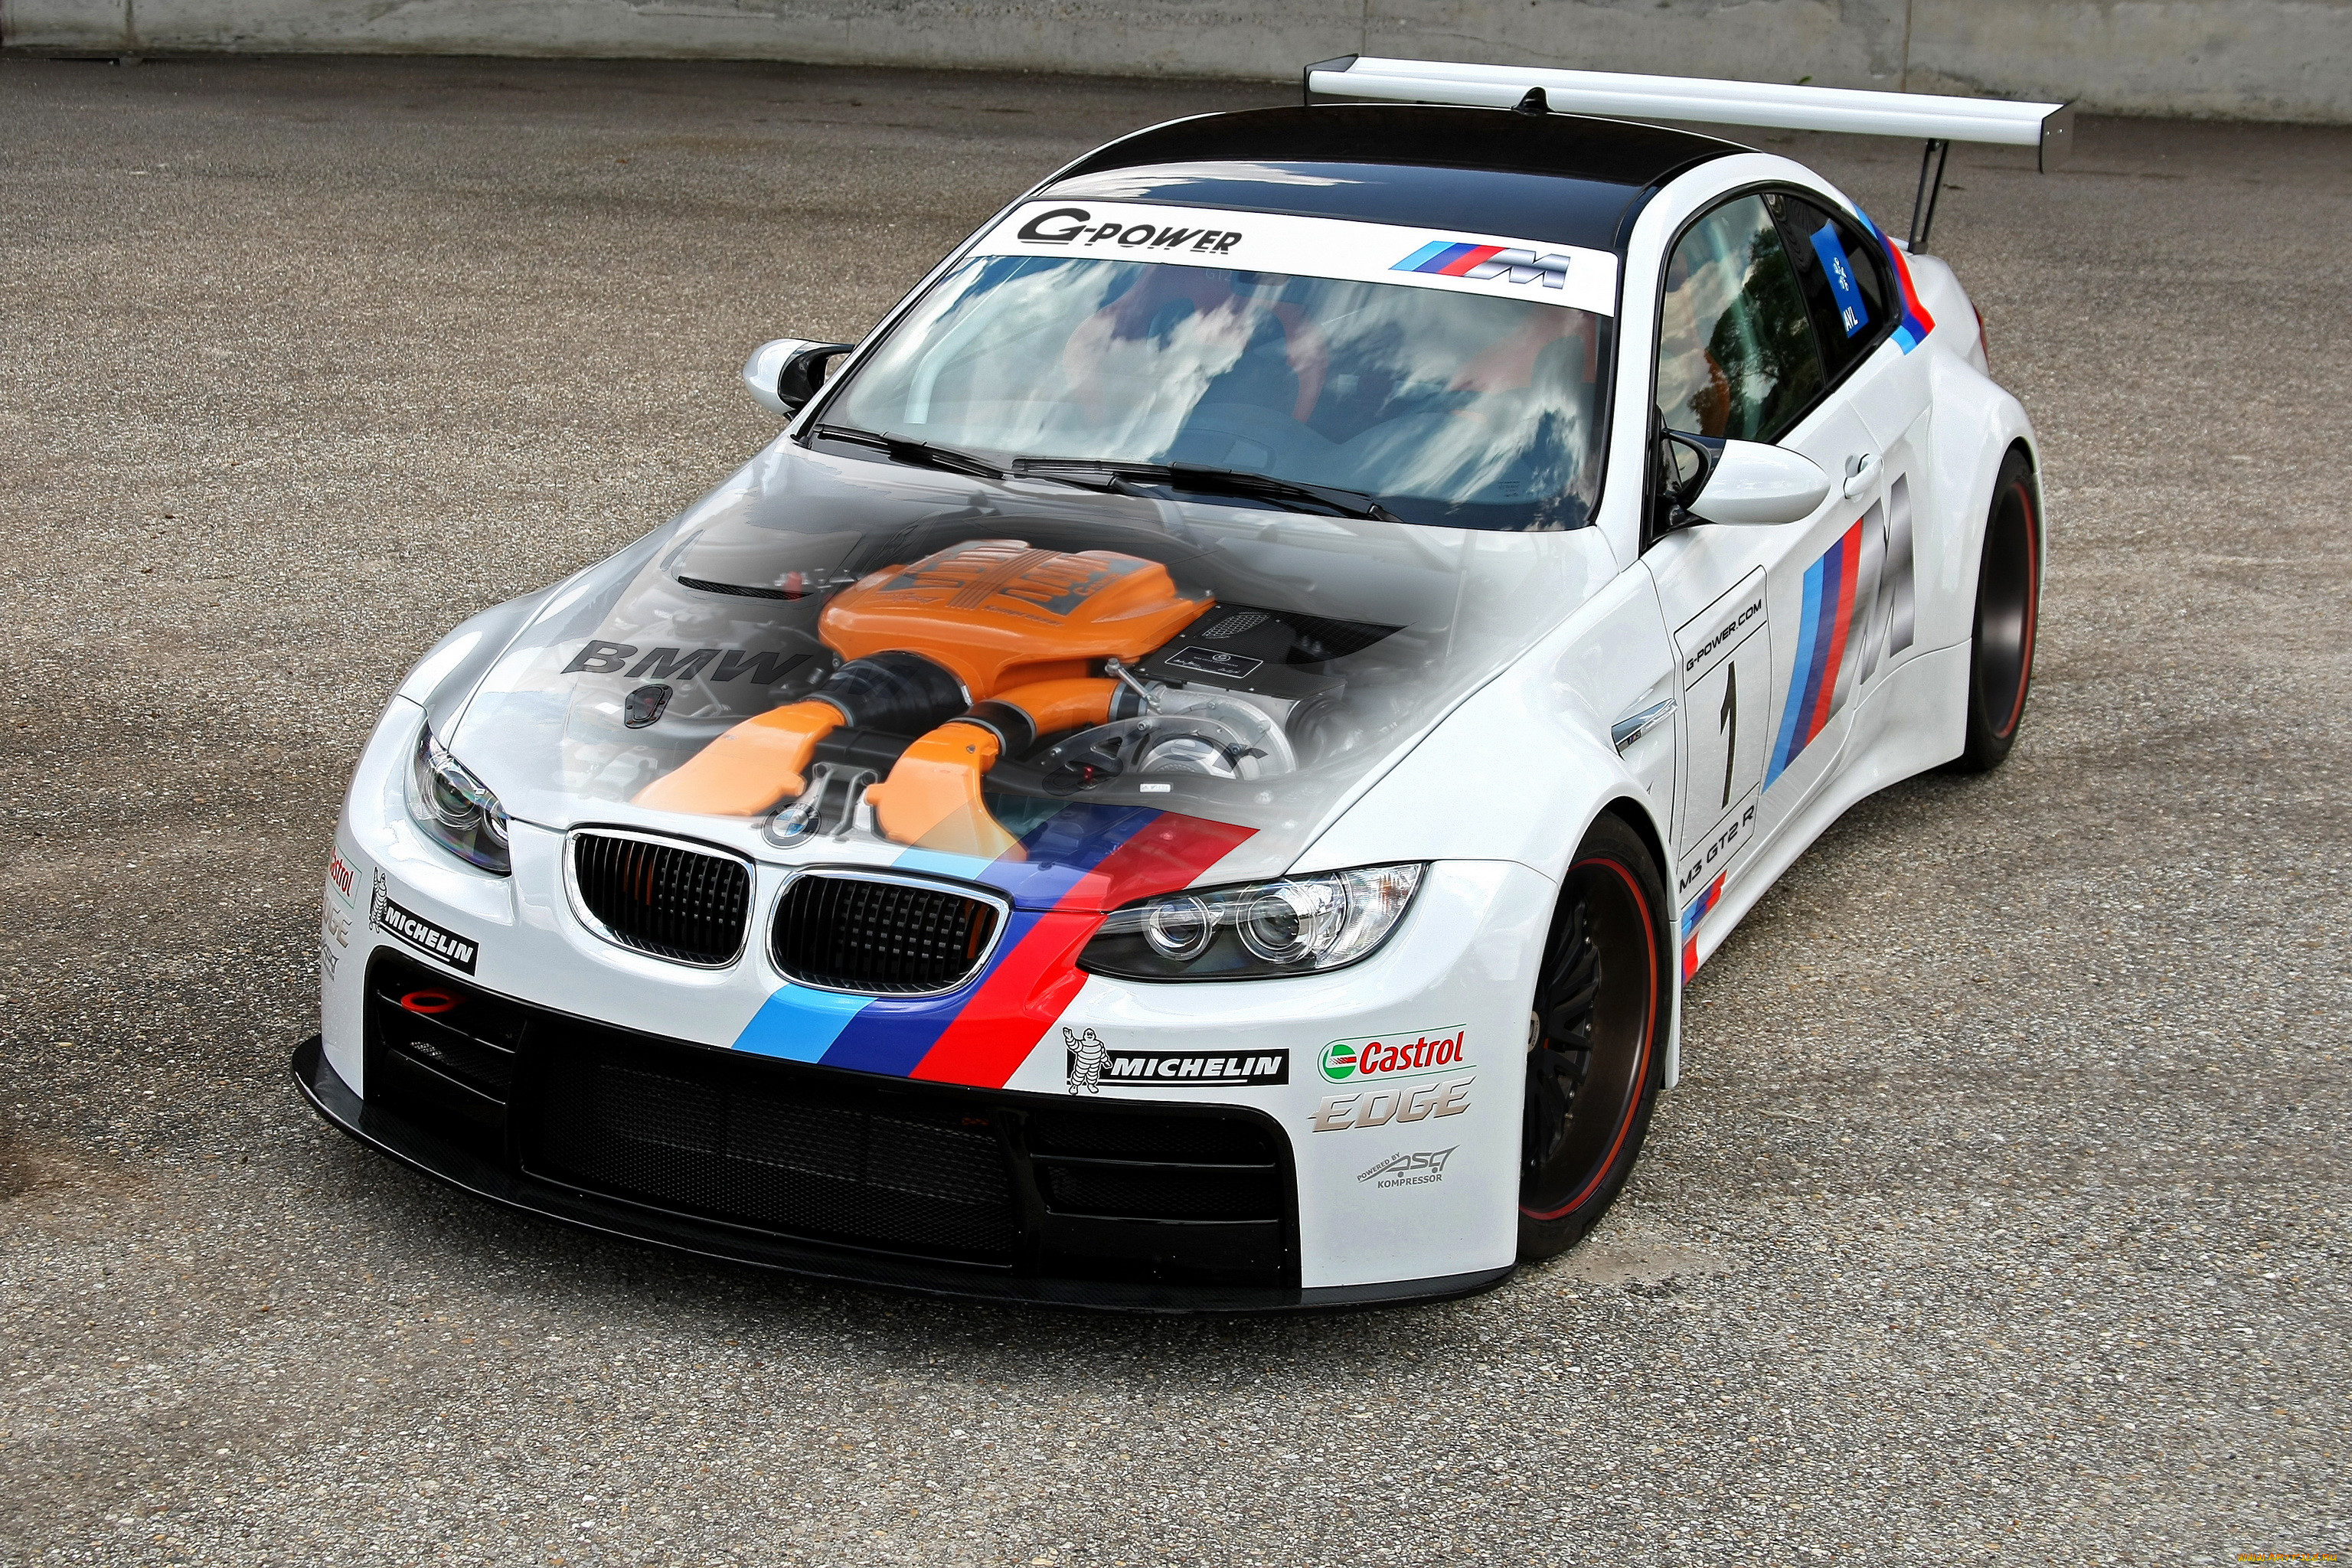 2013, power, m3, gt2, based, on, bmw, e92, , g-power